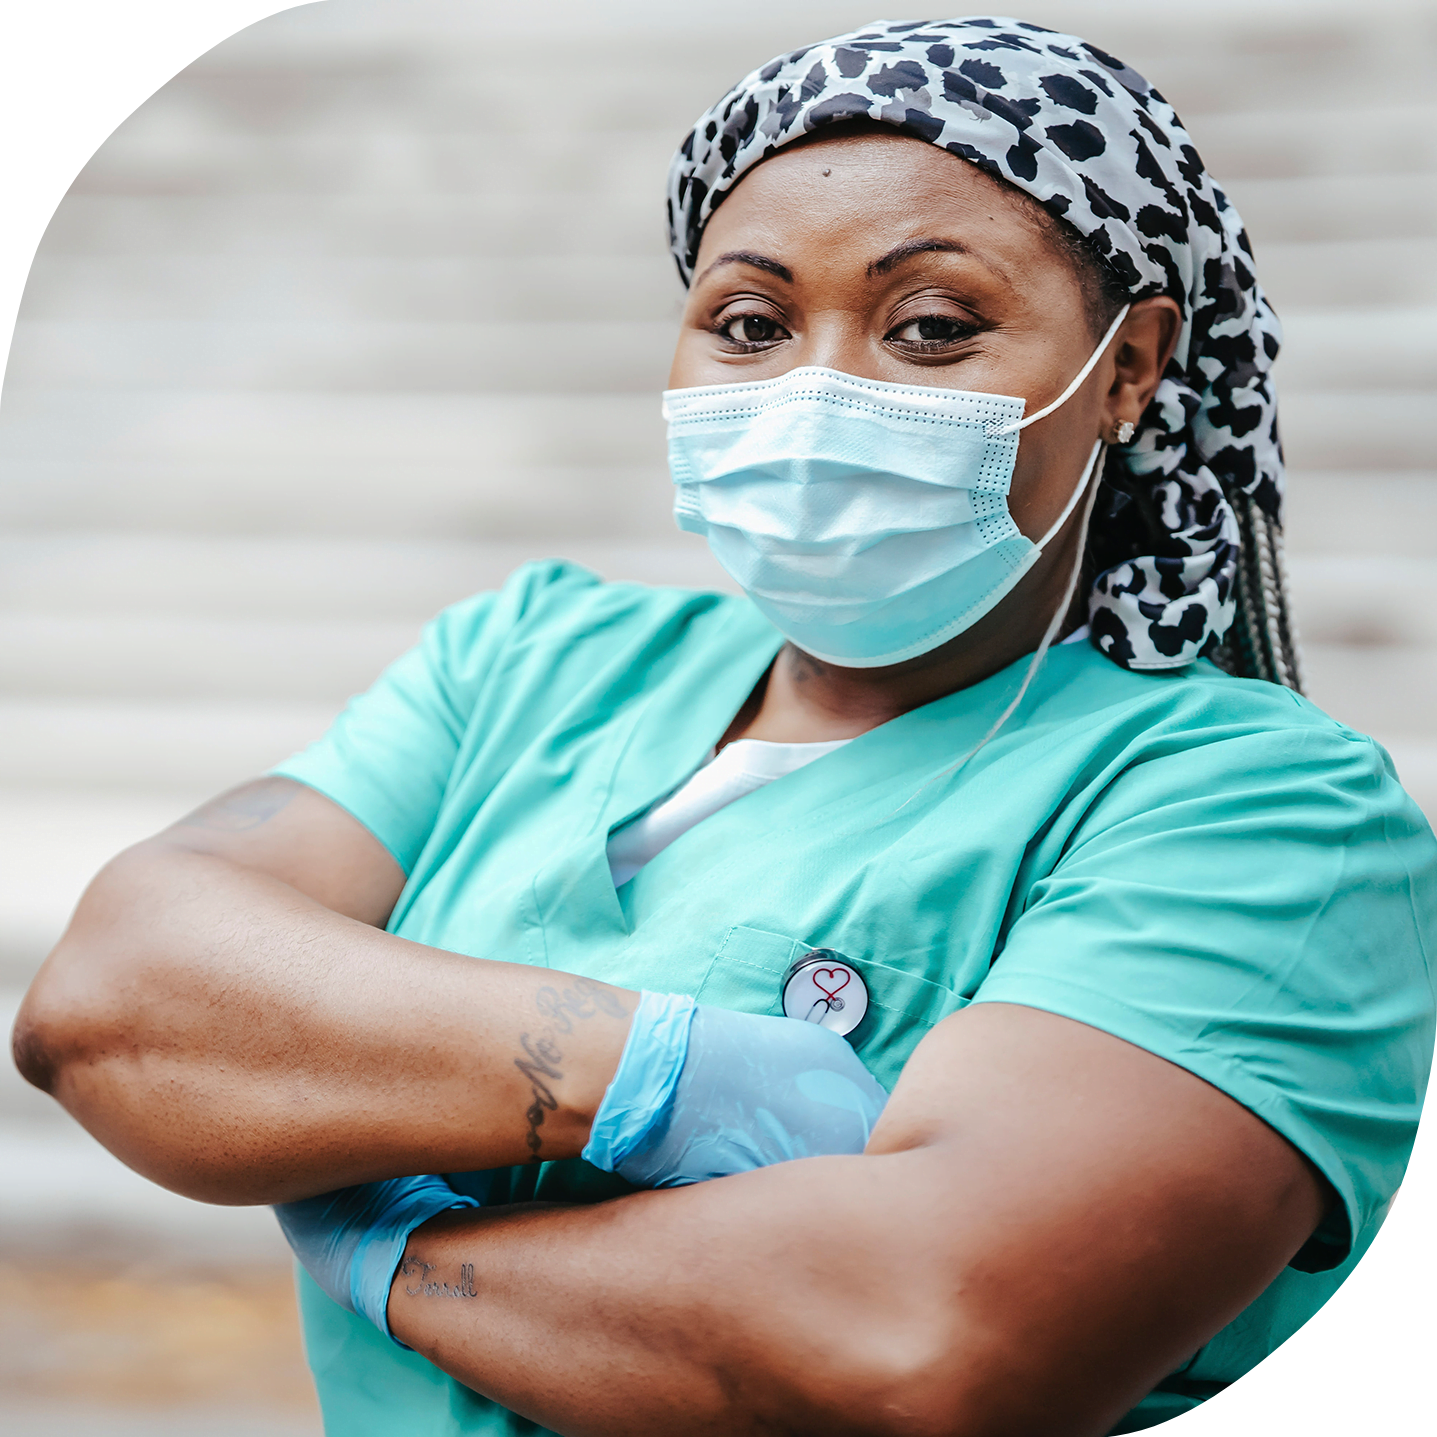 A Black woman wearing a mask and health care worker scrubs is looking into the camera.